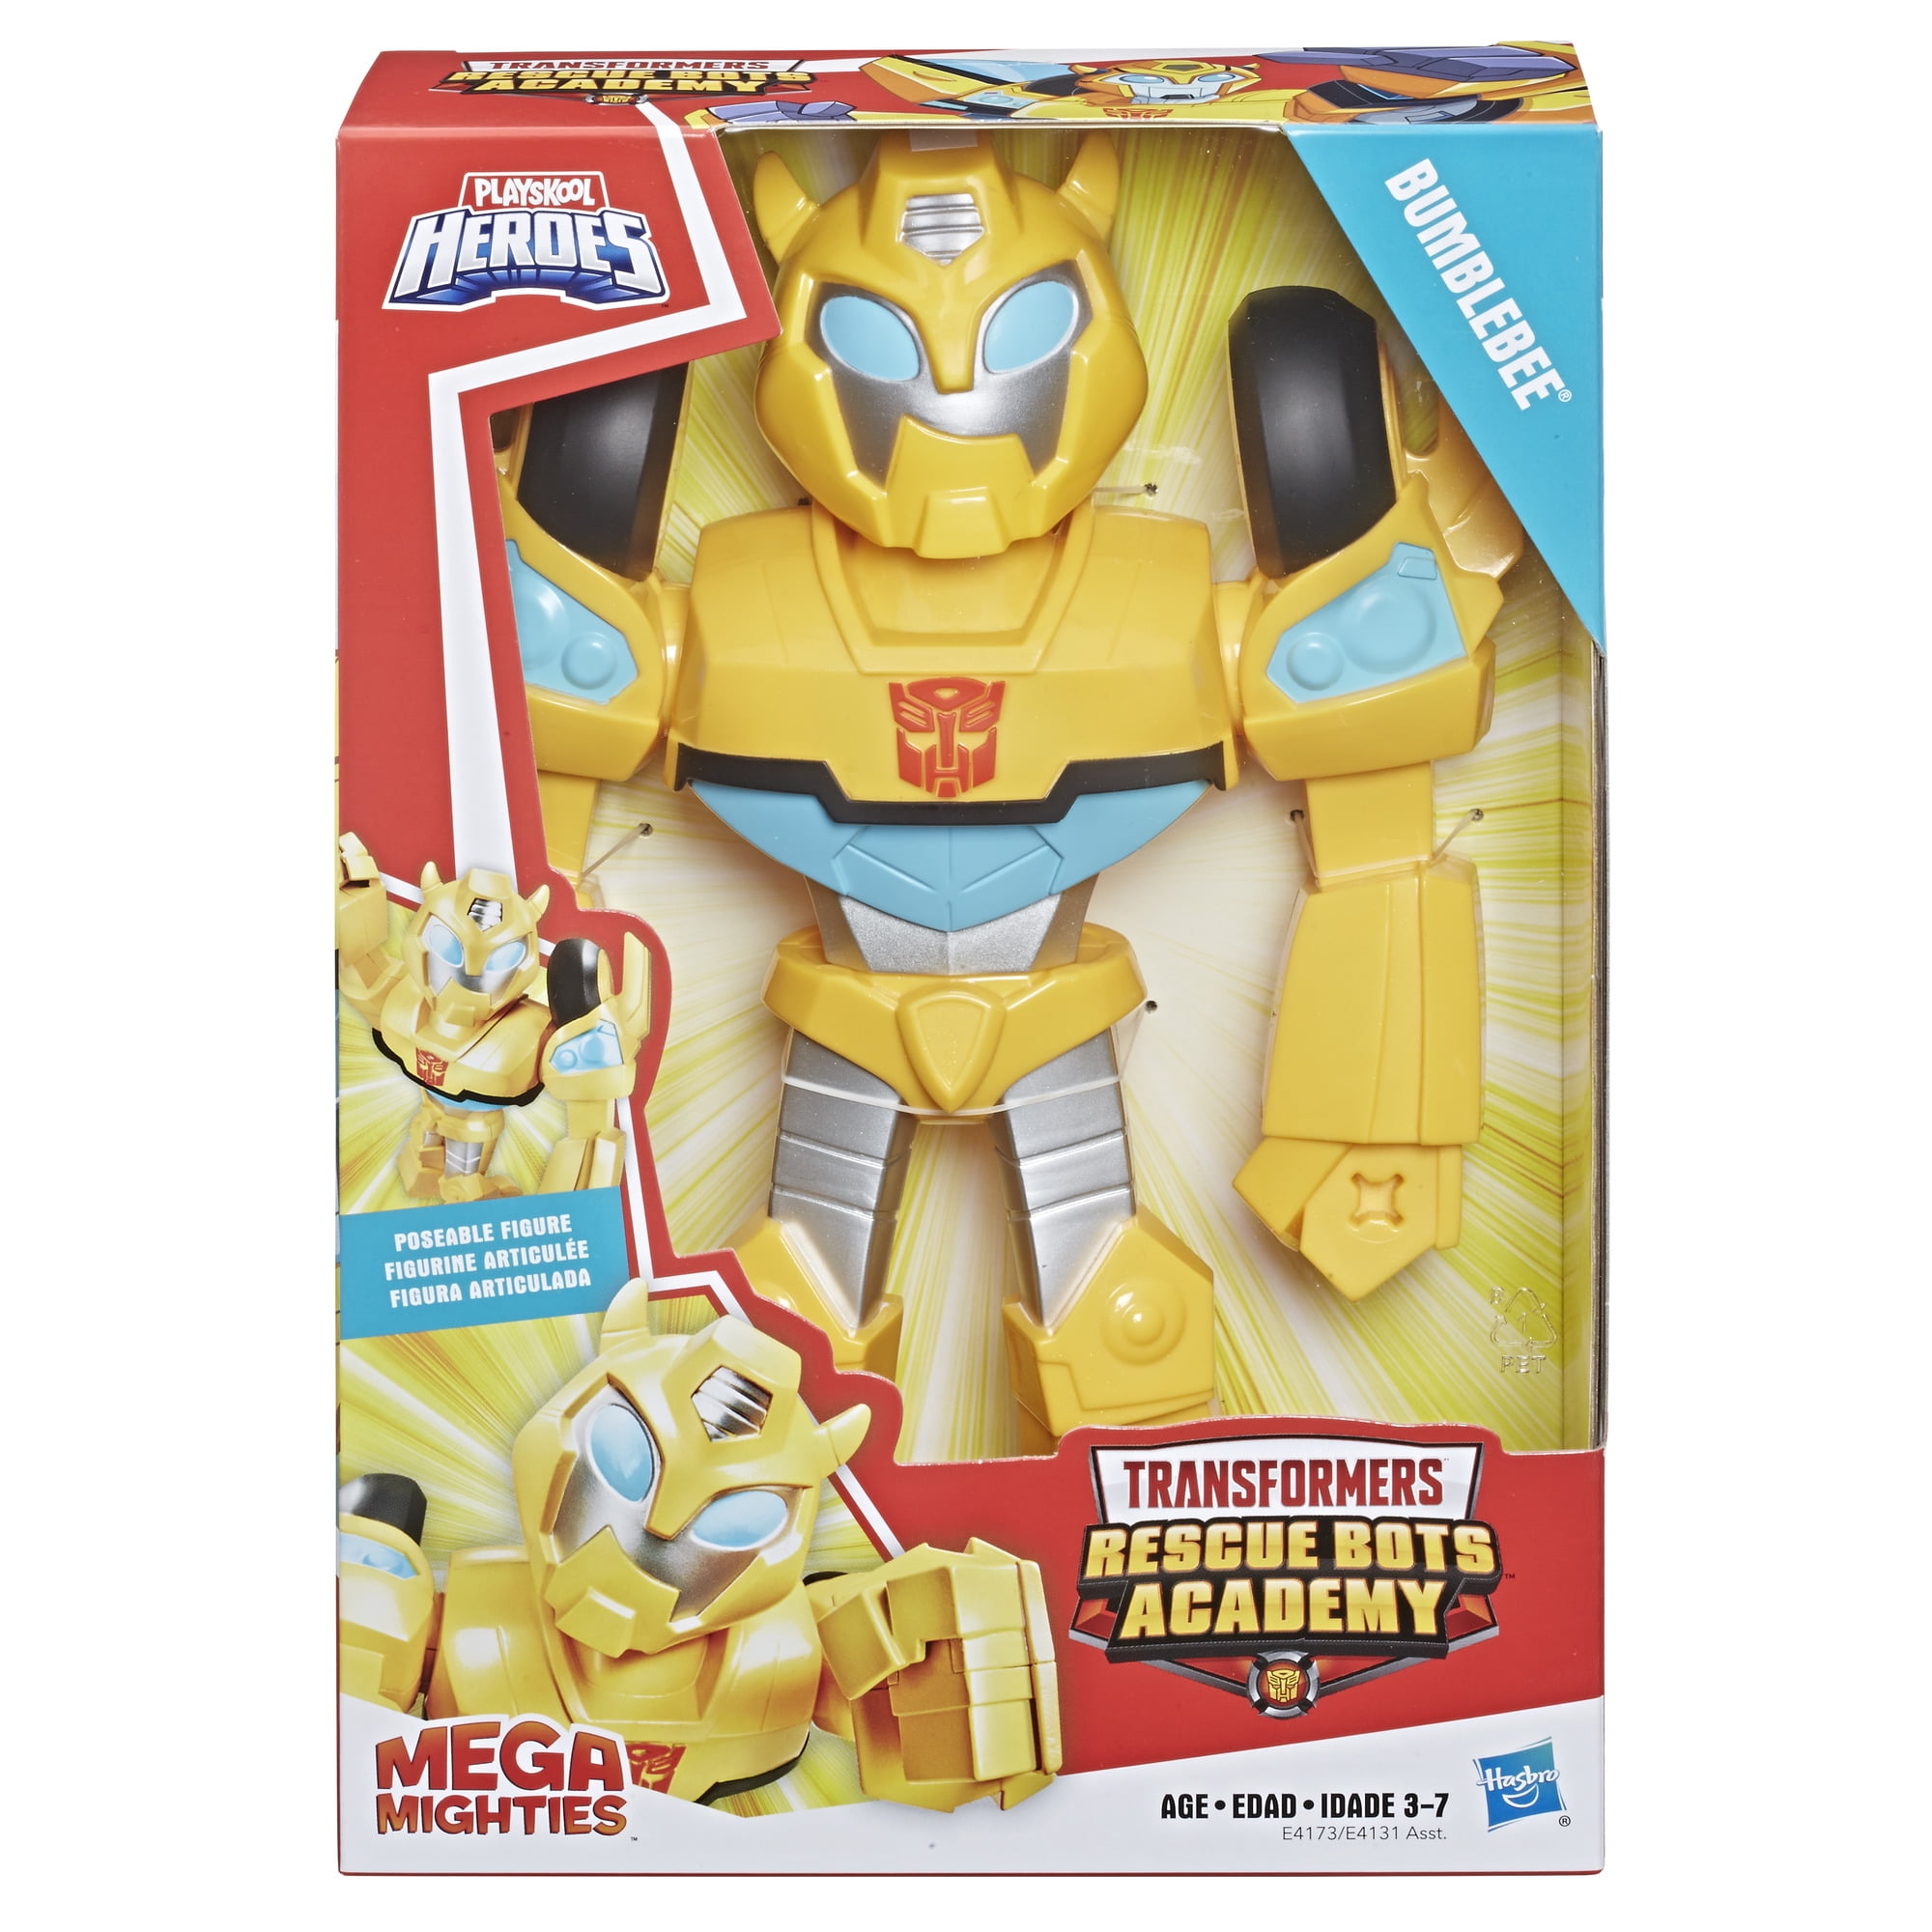 Transformers Rescue Bots Academy Mega Mighties Bumblebee 10-inch Action Figure 